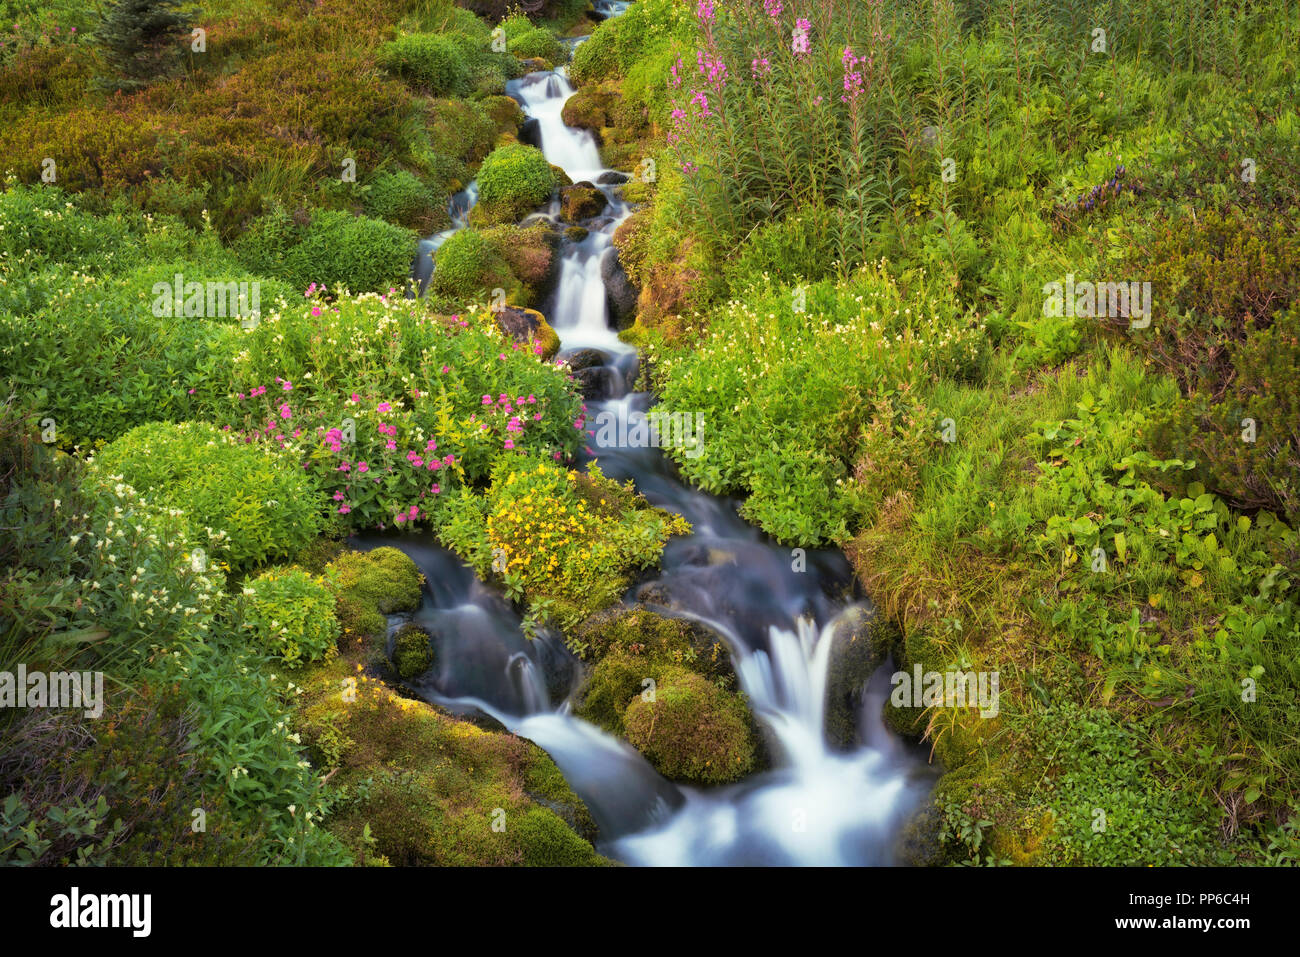 Late summer wildflowers bloom along this small stream which flows into the Paradise River at Washington’s Mt Rainier National Park. Stock Photo